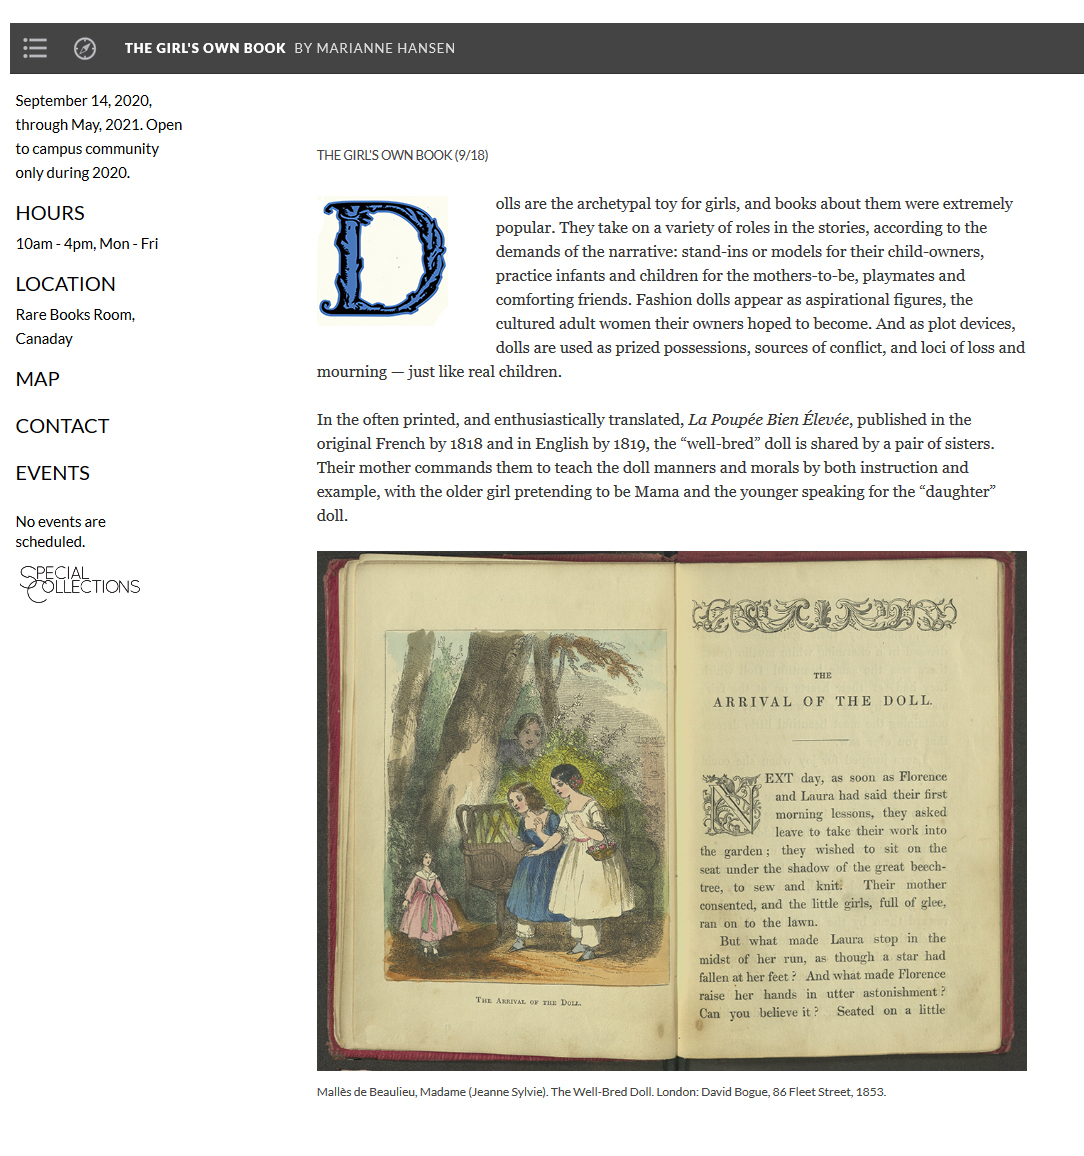 Screenshot of the online version the the exhibition, The Girl's Own Book